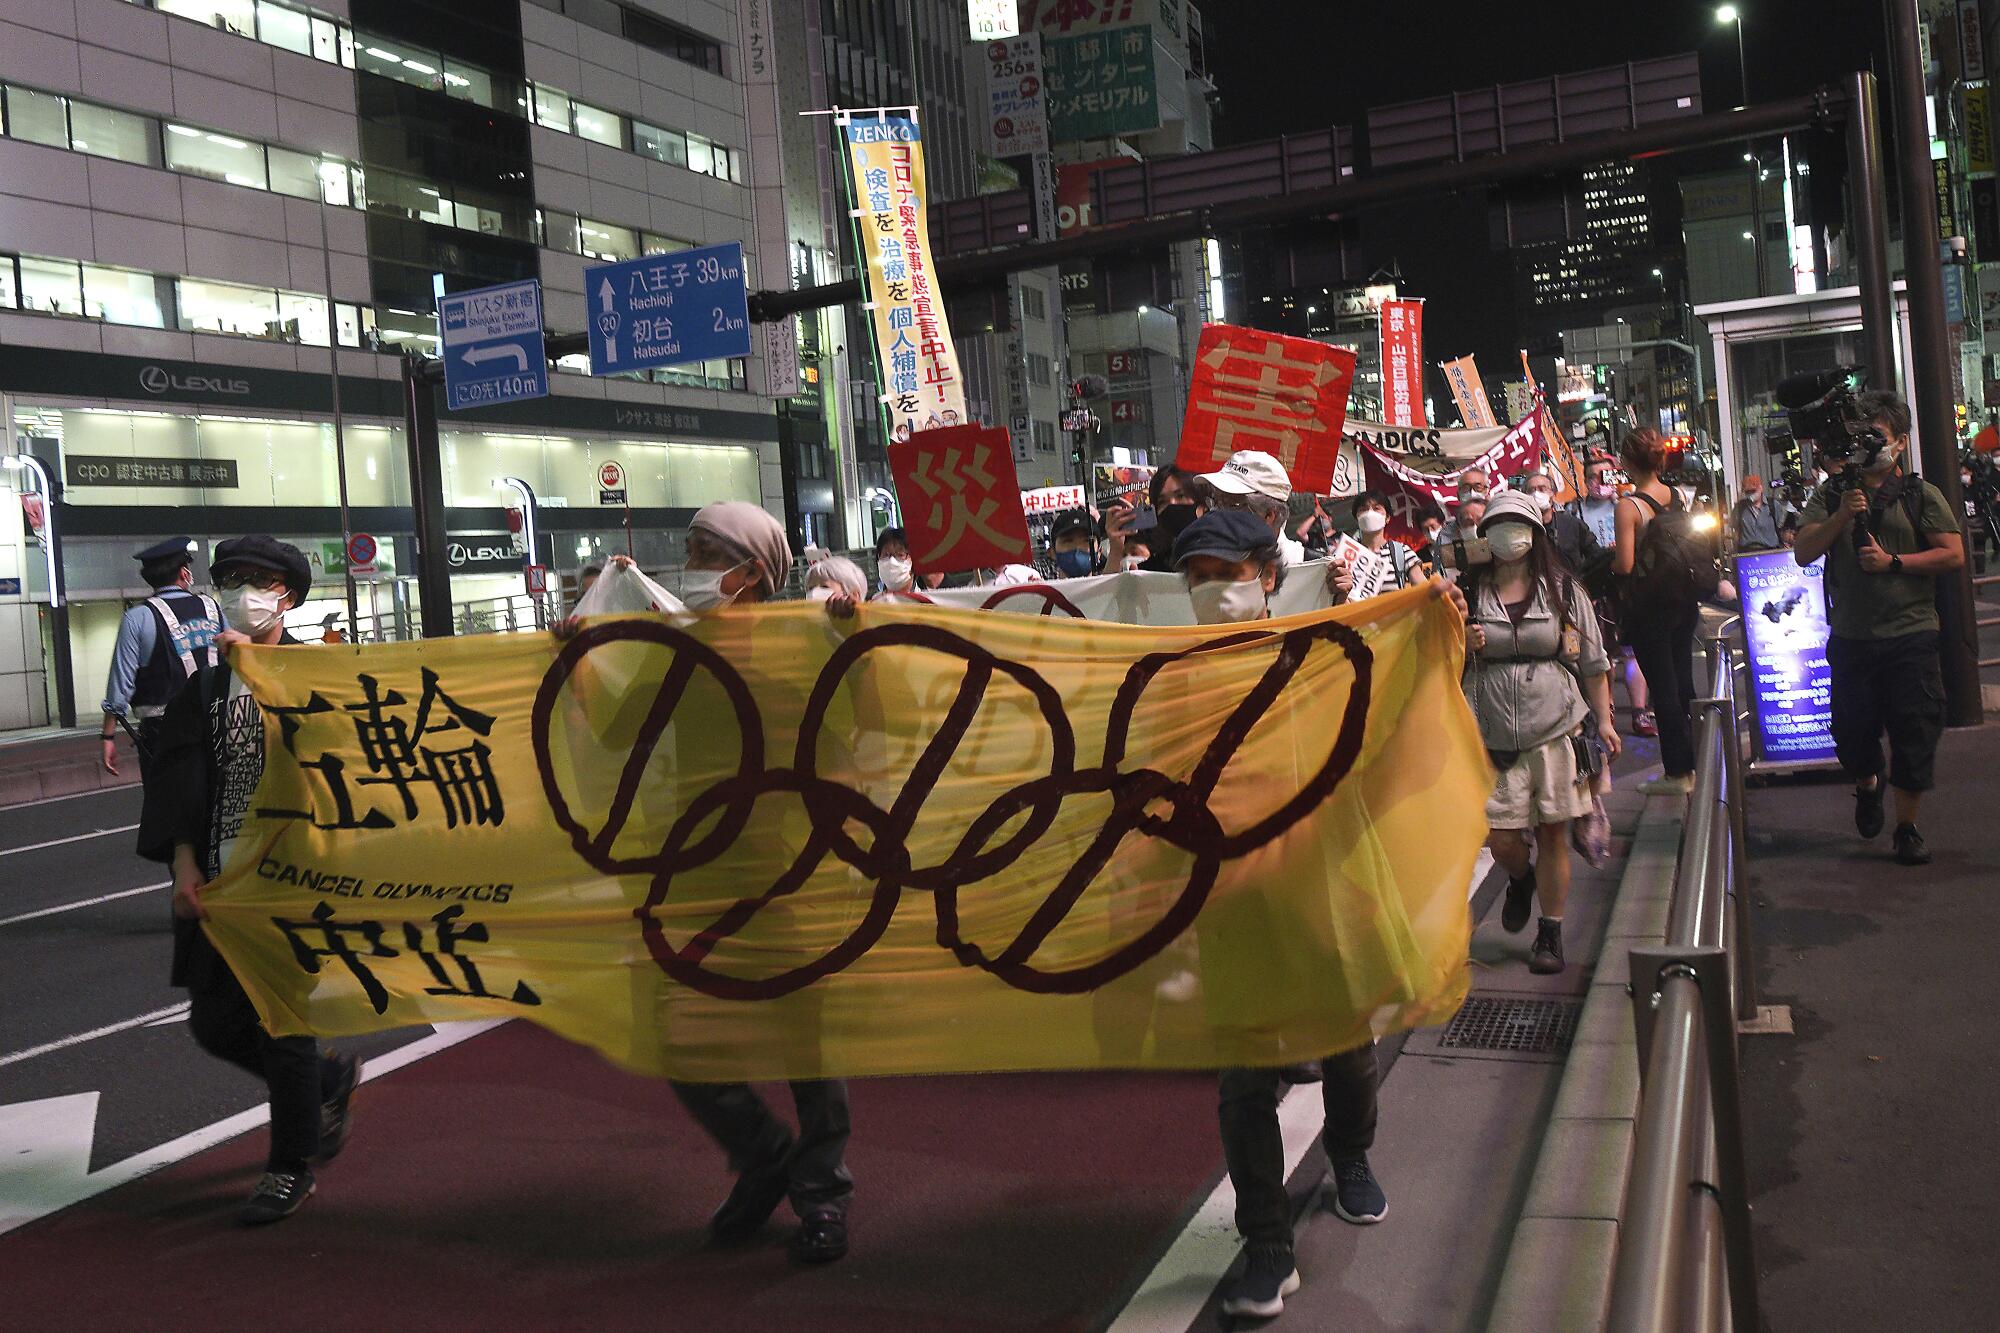 People march at night with banners and signs.